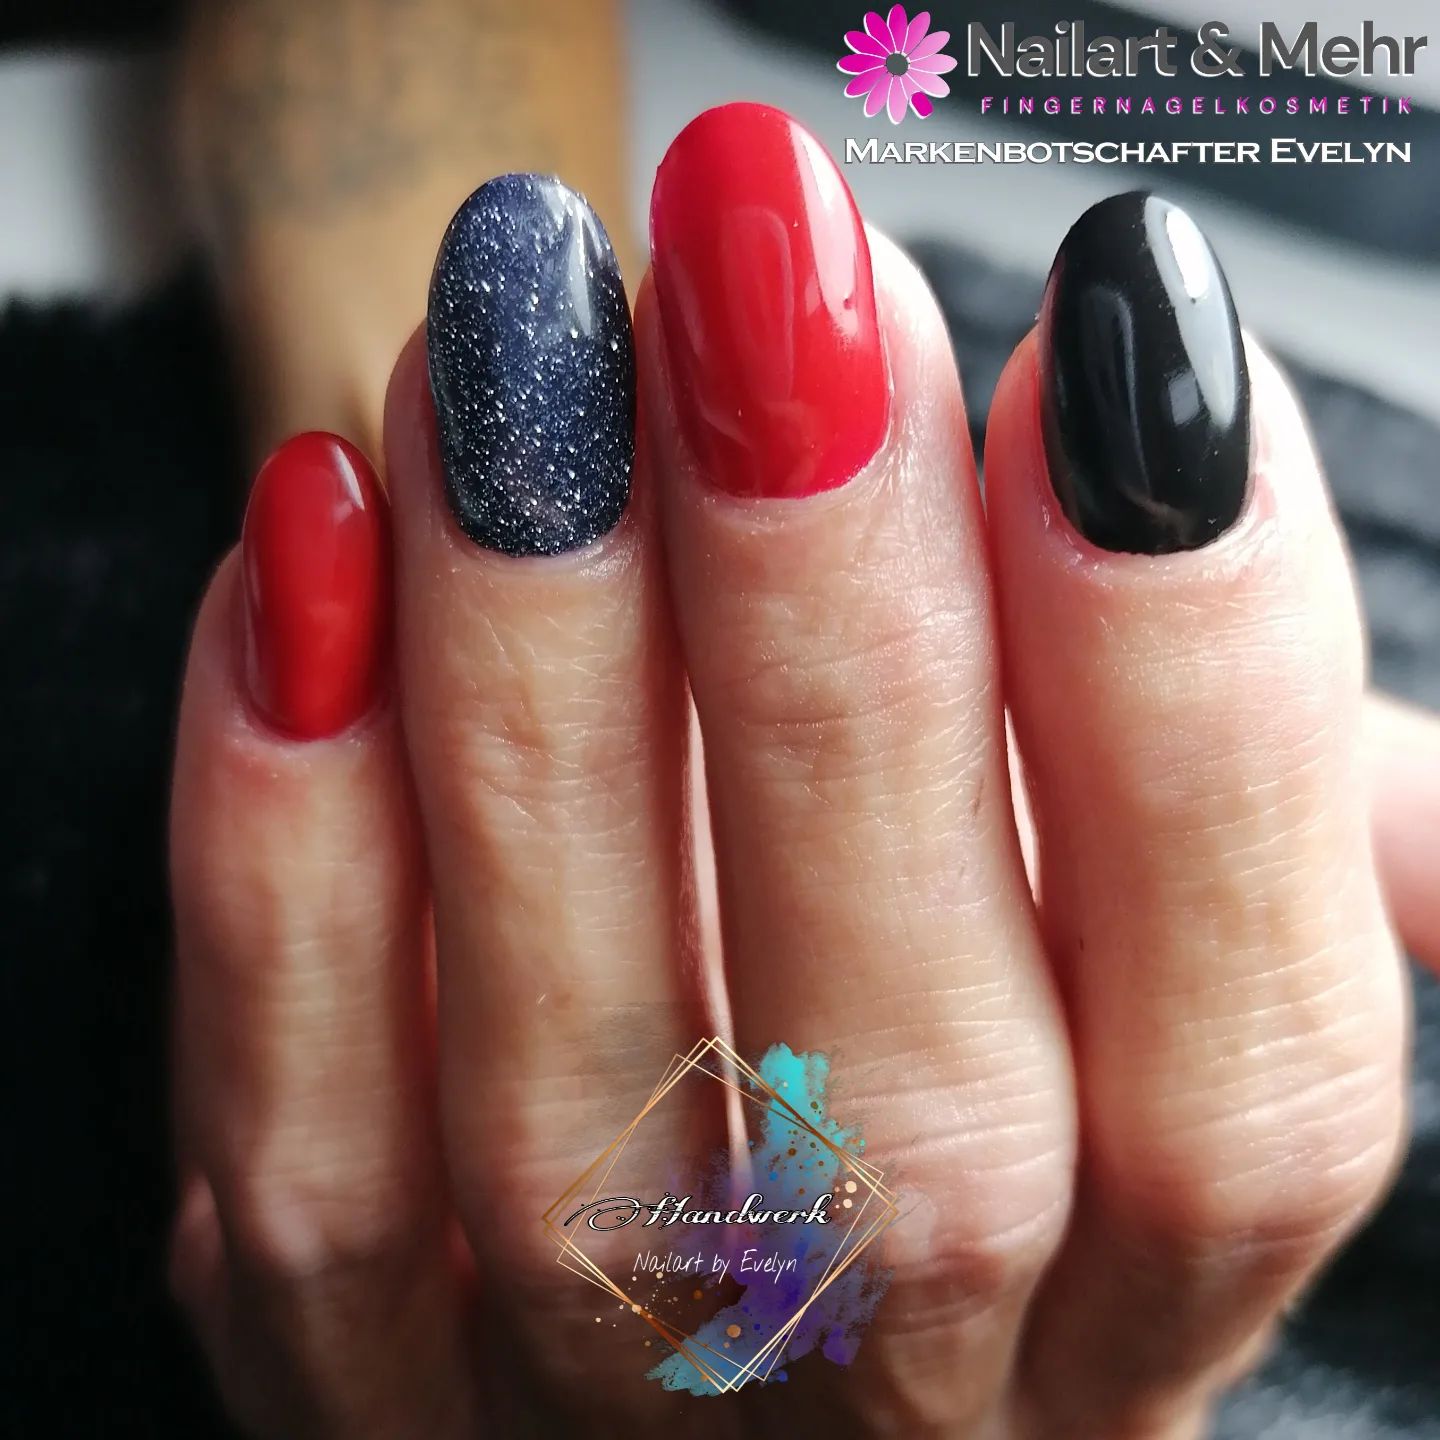 Classics never go out of style, do they? Let's apply red and black nail polishes as well as glittered black accent nail. Wanna show everyone that you have good taste? Then, go for it.